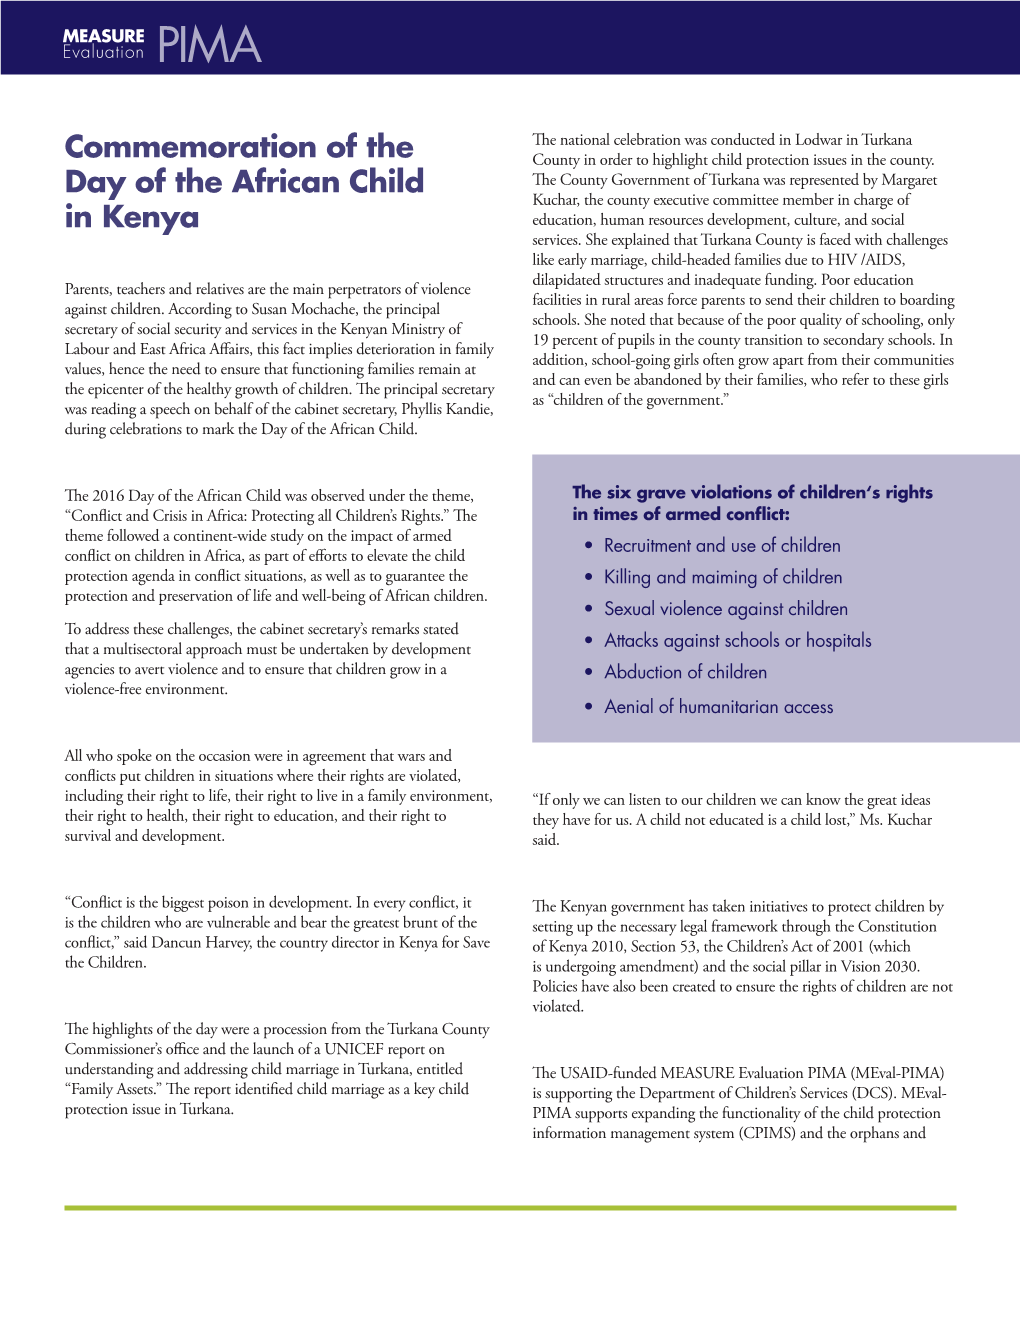 Commemoration of the Day of the African Child in Kenya